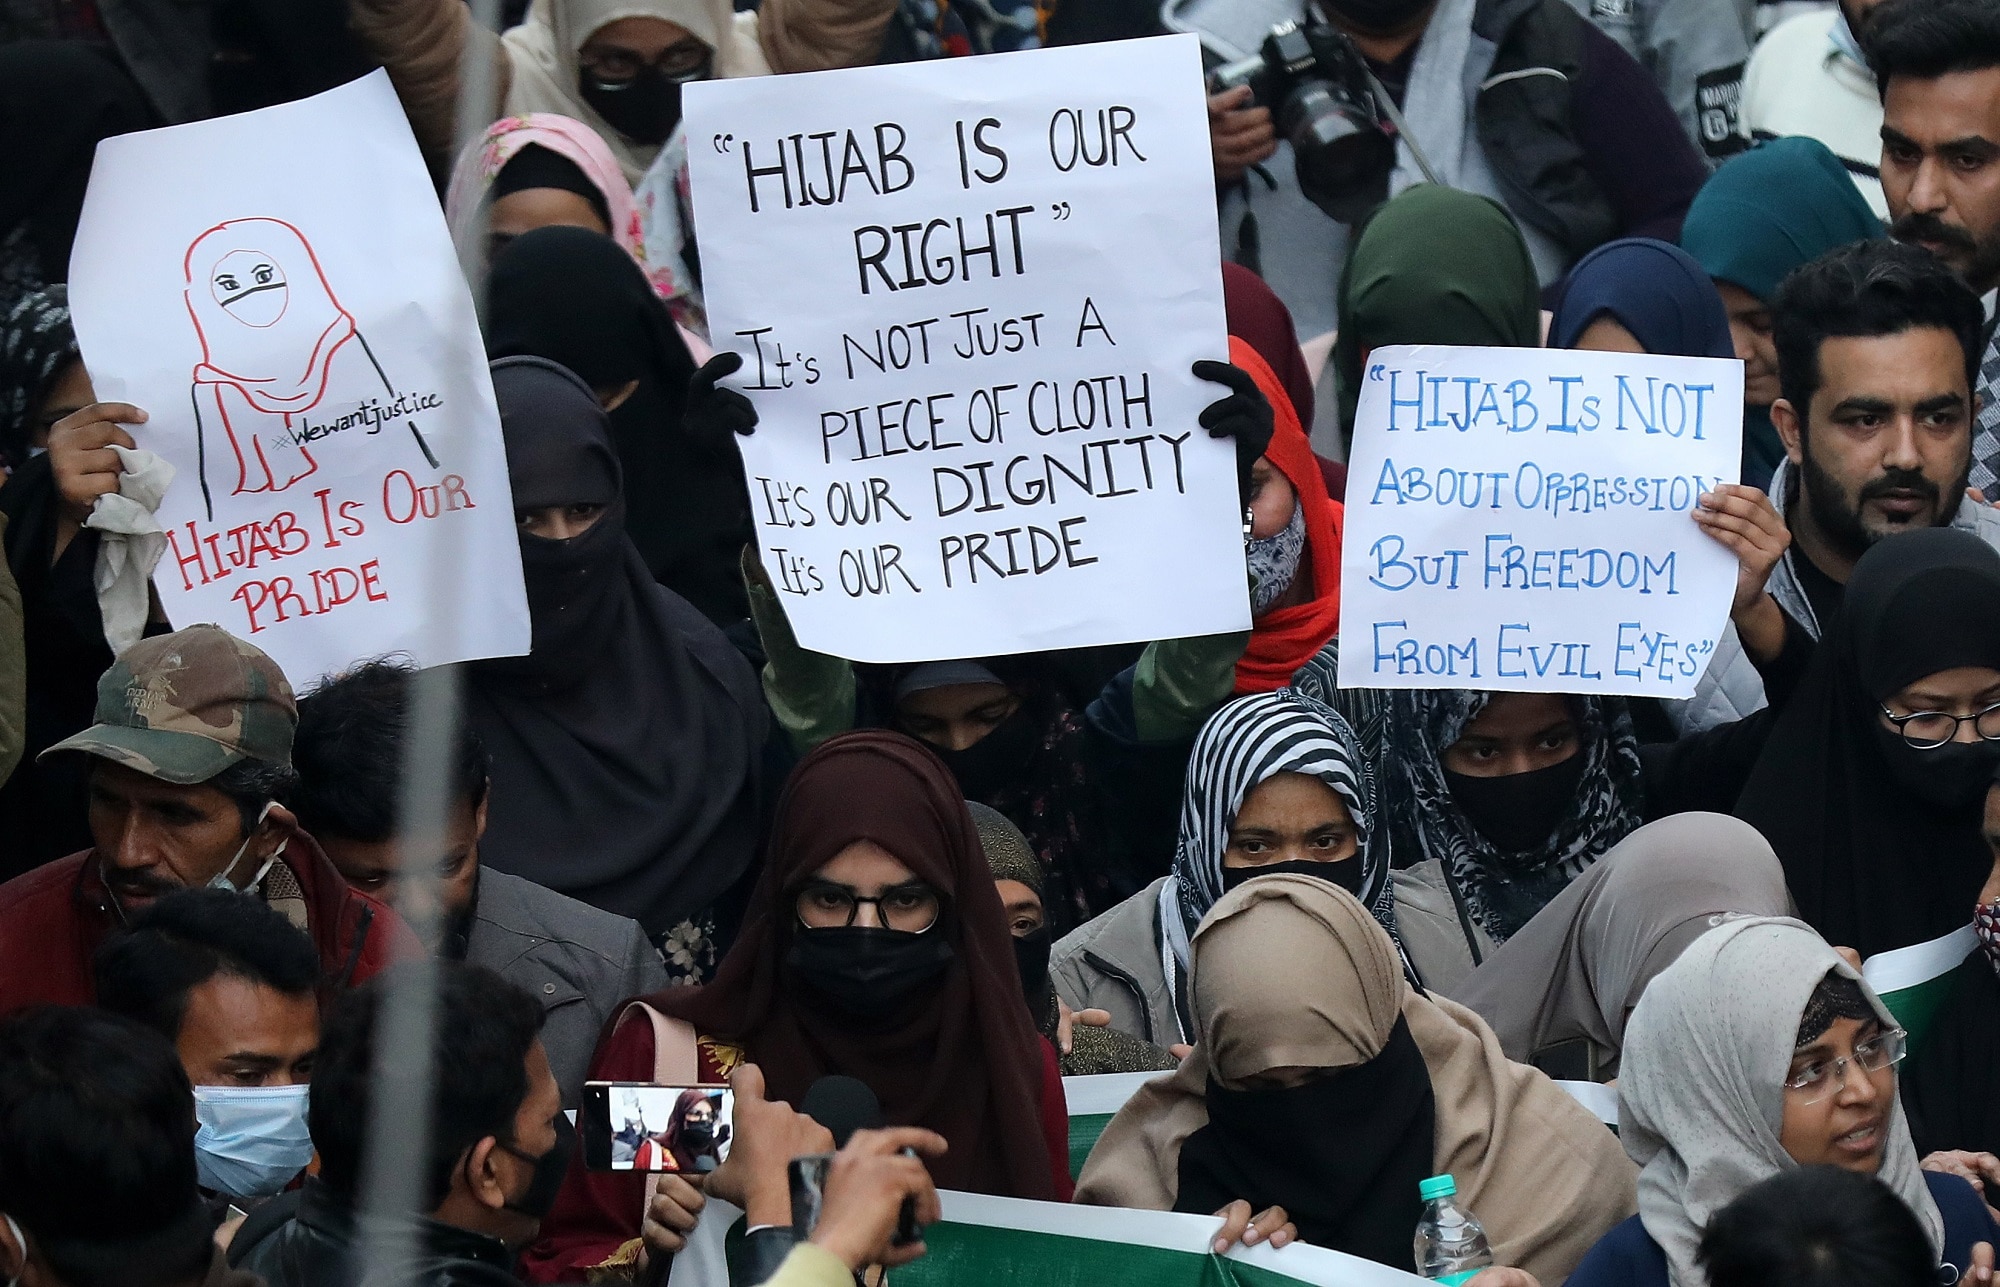 All India Majlis-E-Ittehadul Muslimeen (AIMIM) members and supporters hold a protest against the hijab ban at Shaheen Bagh in New Delhi on 9 February 2022.